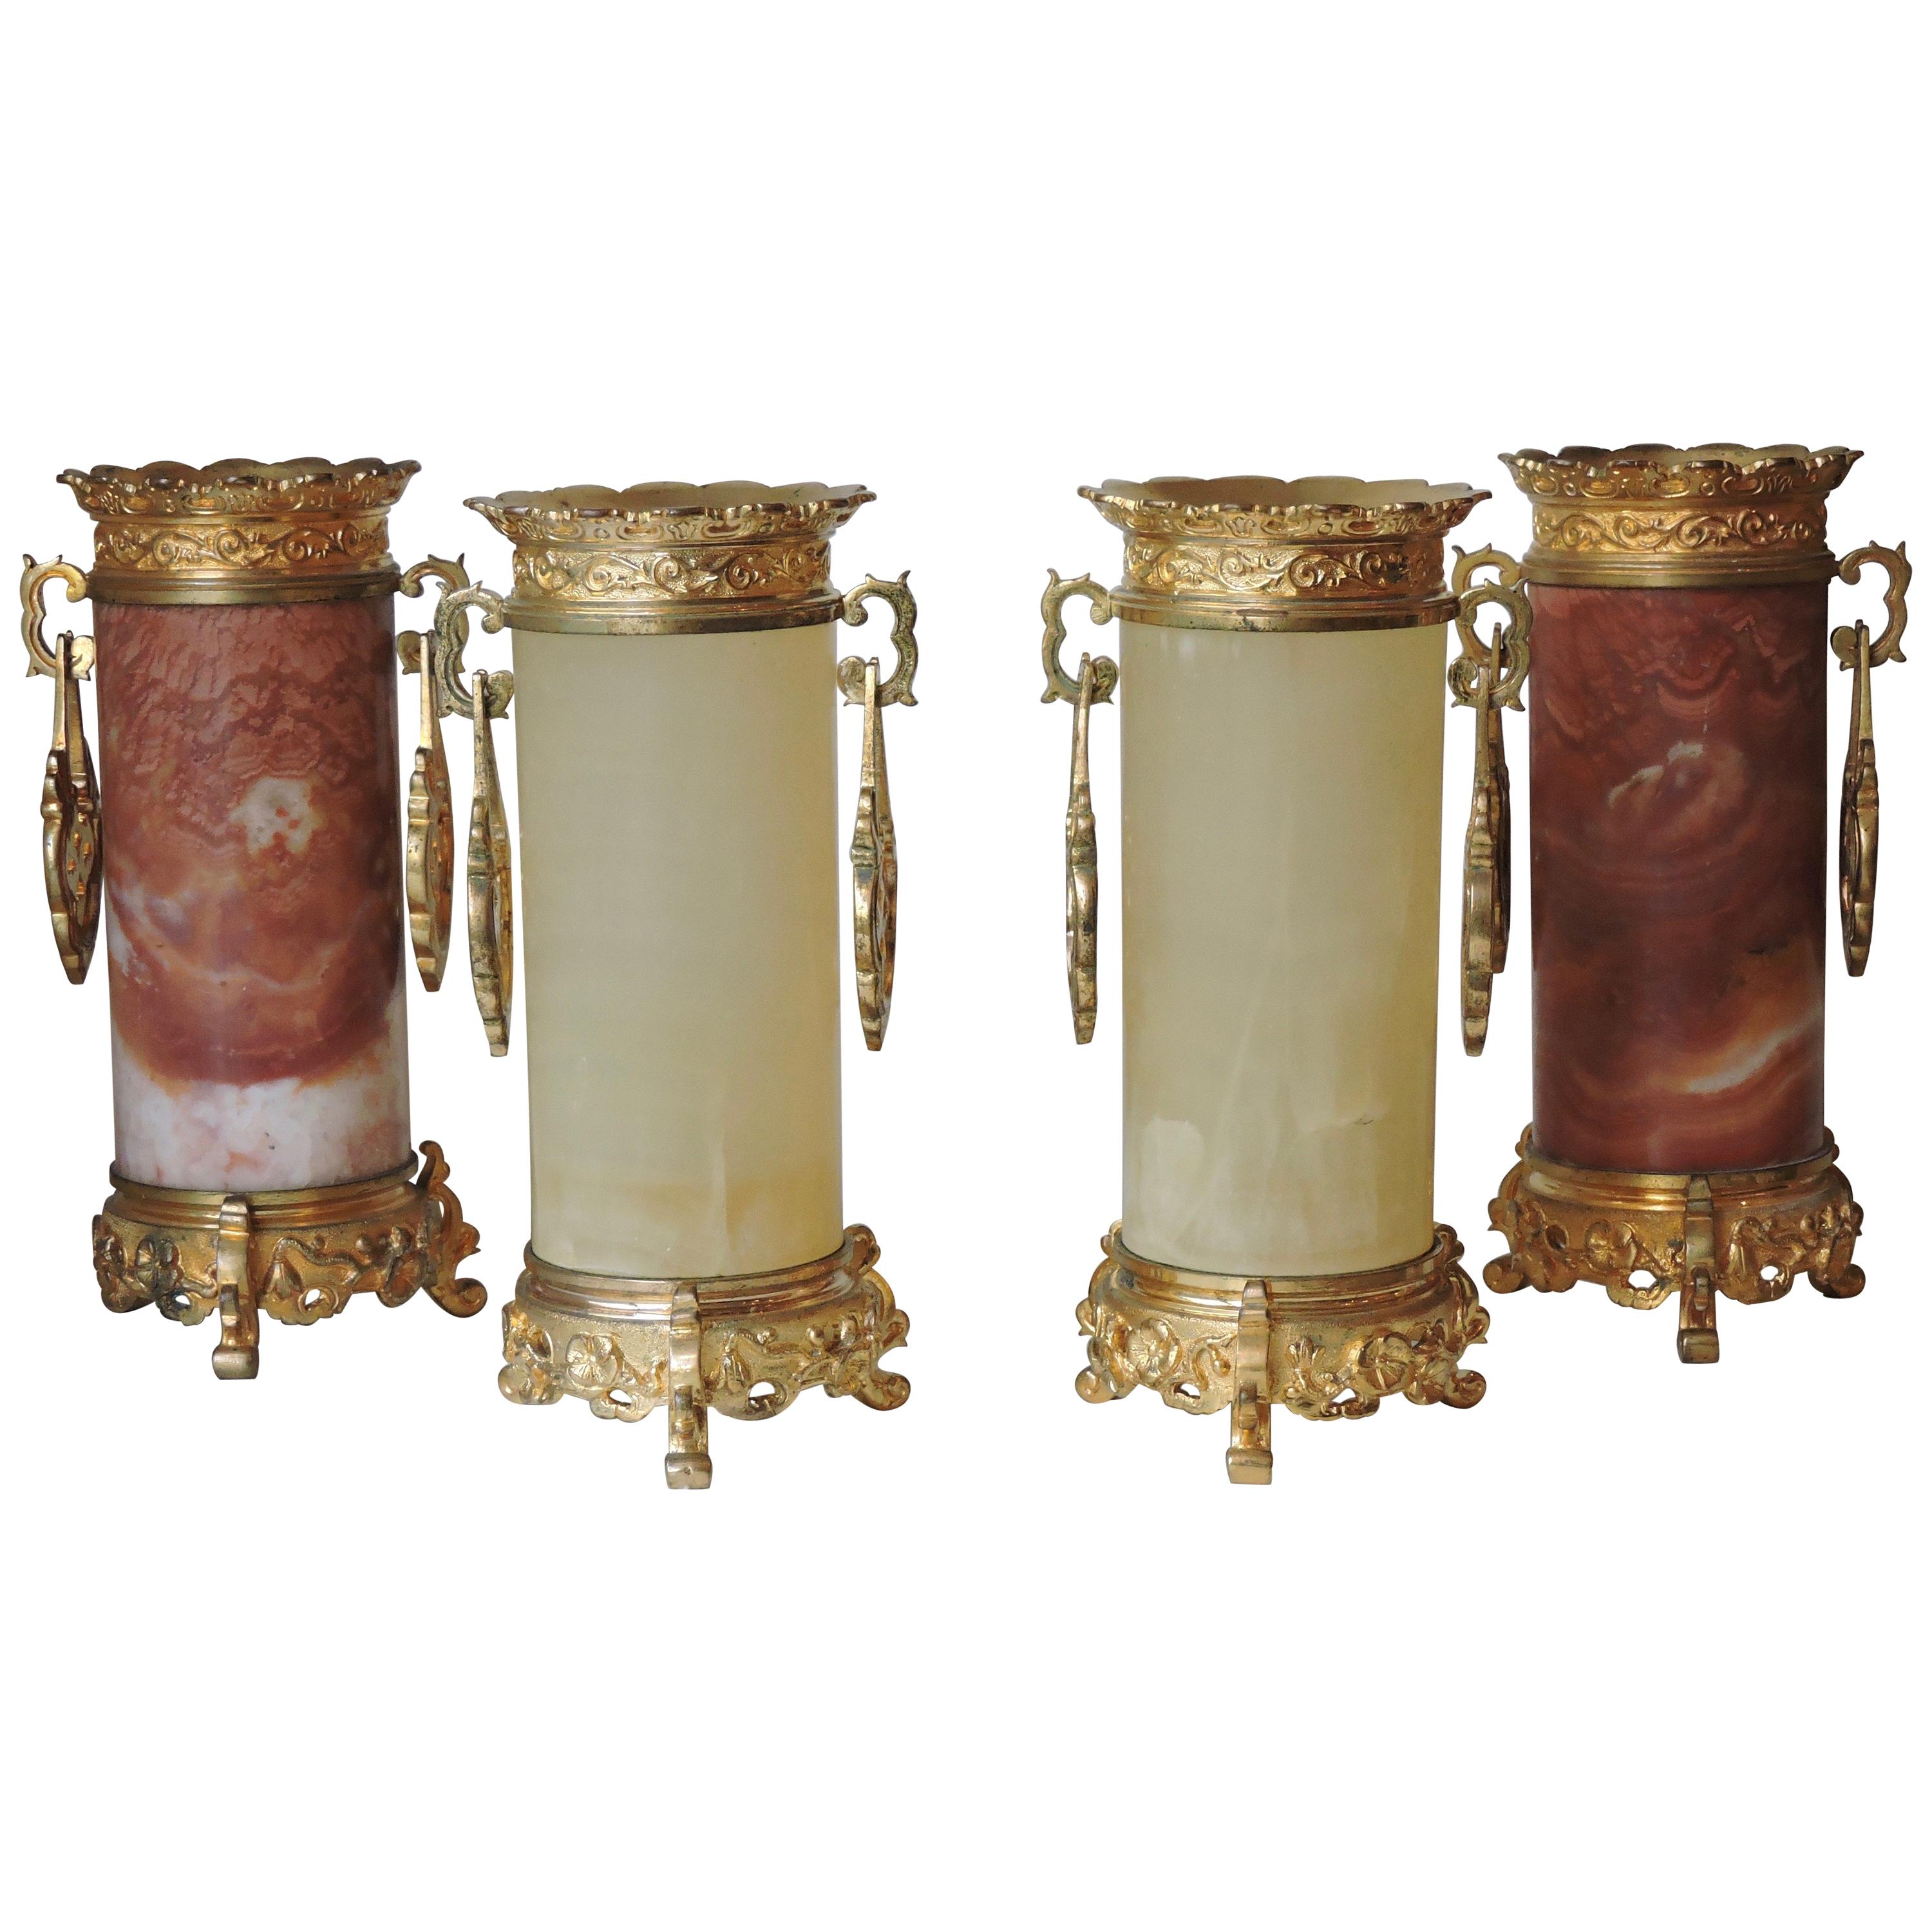 Set of 4 Japonisme Marble, Onyx and Ormolu Vases in the Style of Edouard Lièvre